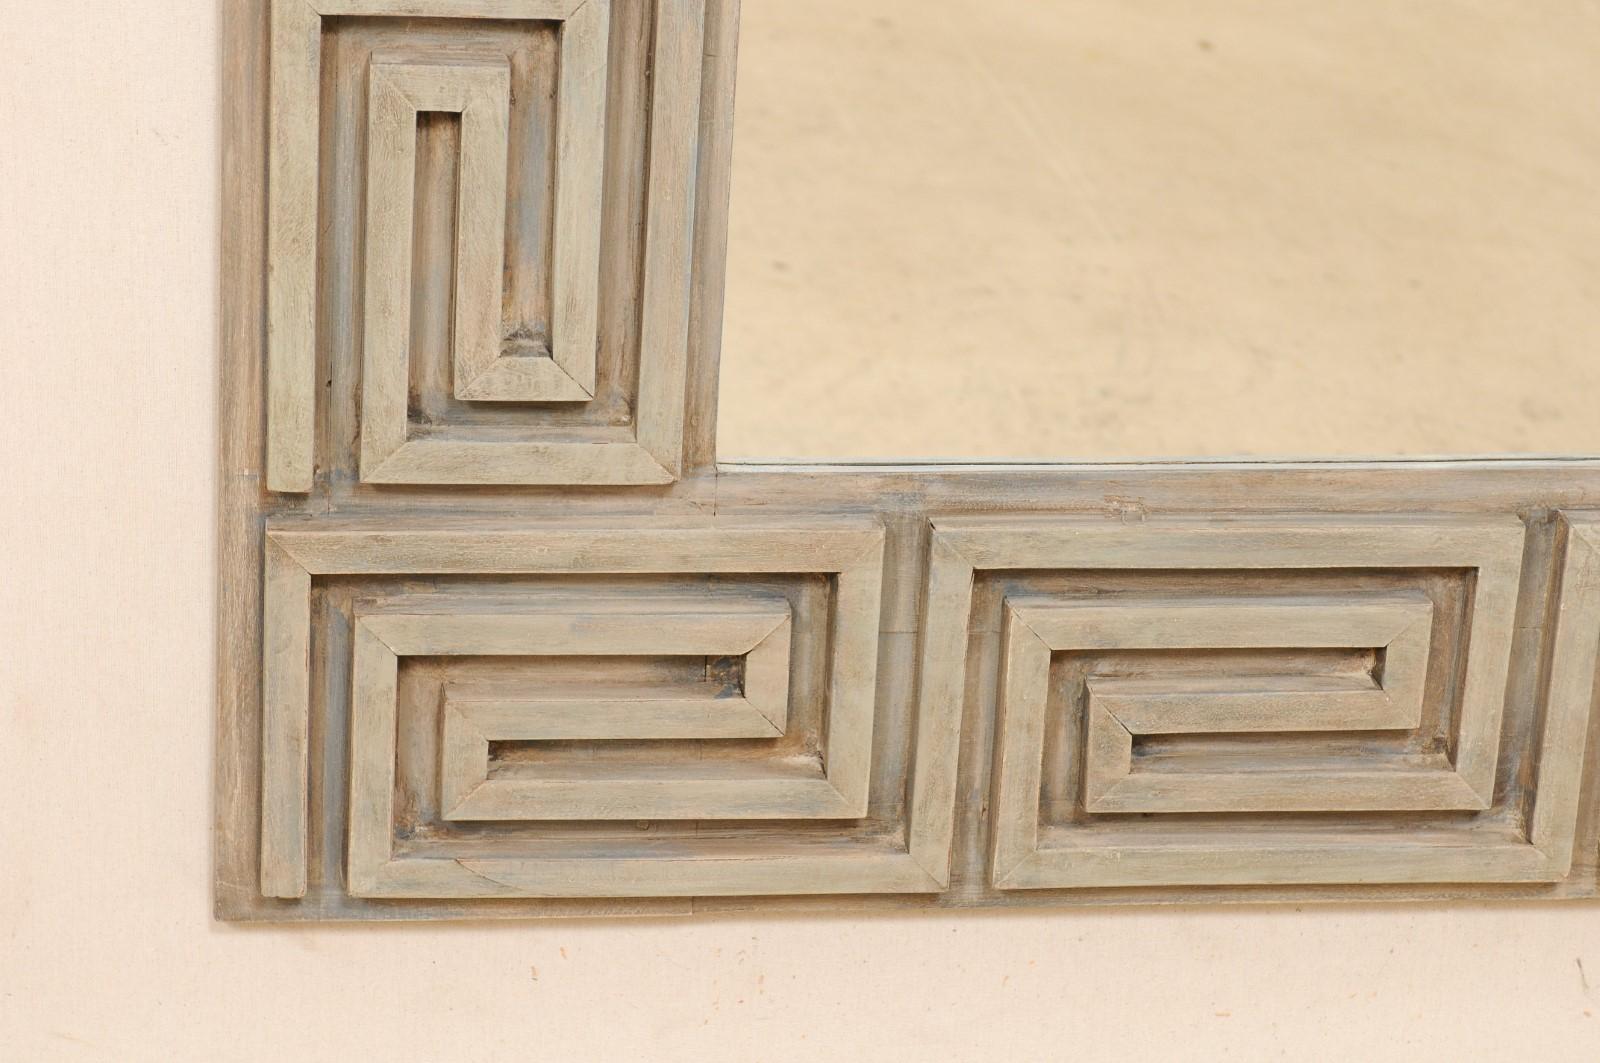 Contemporary Artisan-Made Greek Key Carved and Painted Wood Rectangular Mirror For Sale